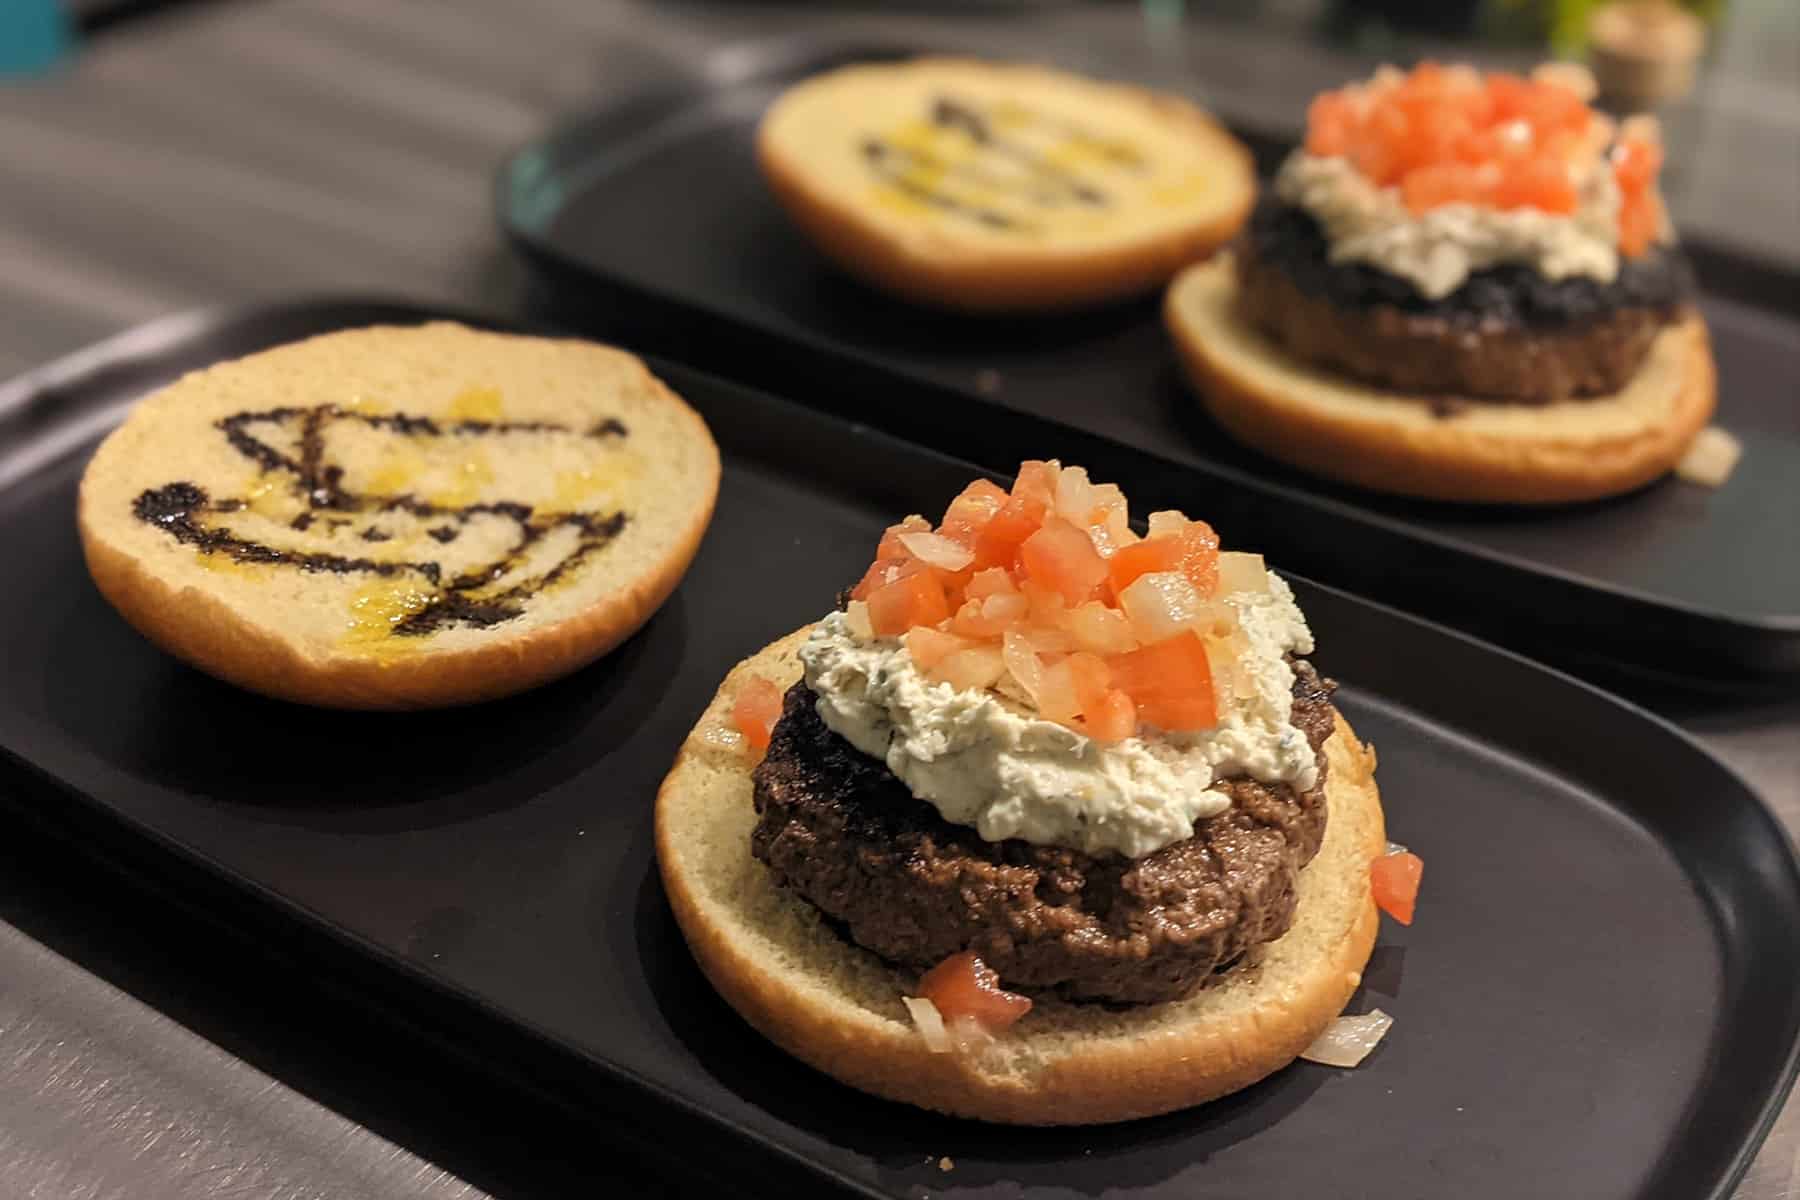 Burgers topped with cheese spread and bruschetta on a brioche bun drizzled with olive oil and balsamic